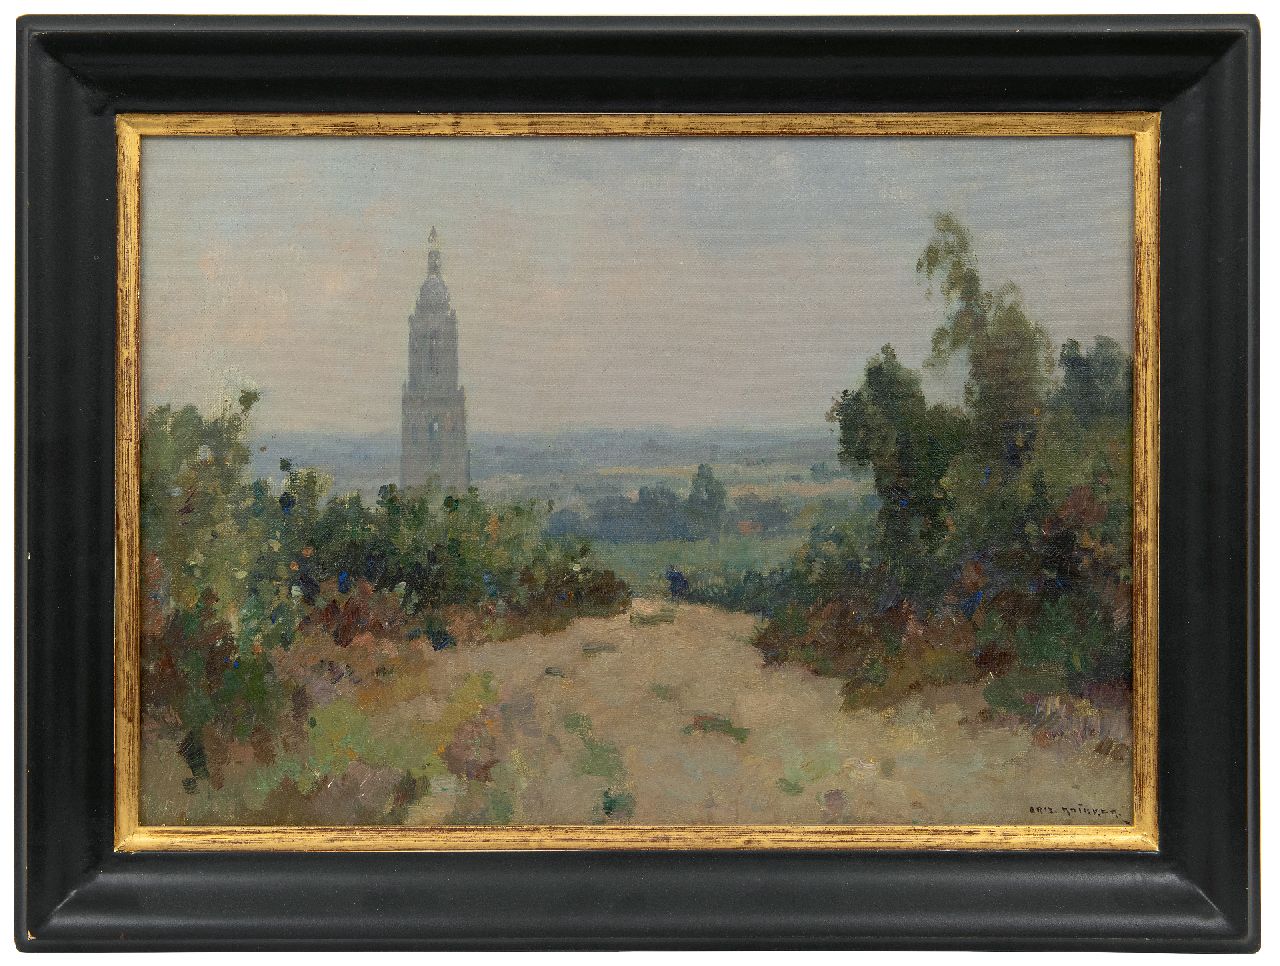 Knikker A.  | Aris Knikker, A view of the Cuneratower, Rhenen, oil on canvas 35.2 x 50.1 cm, signed l.r.